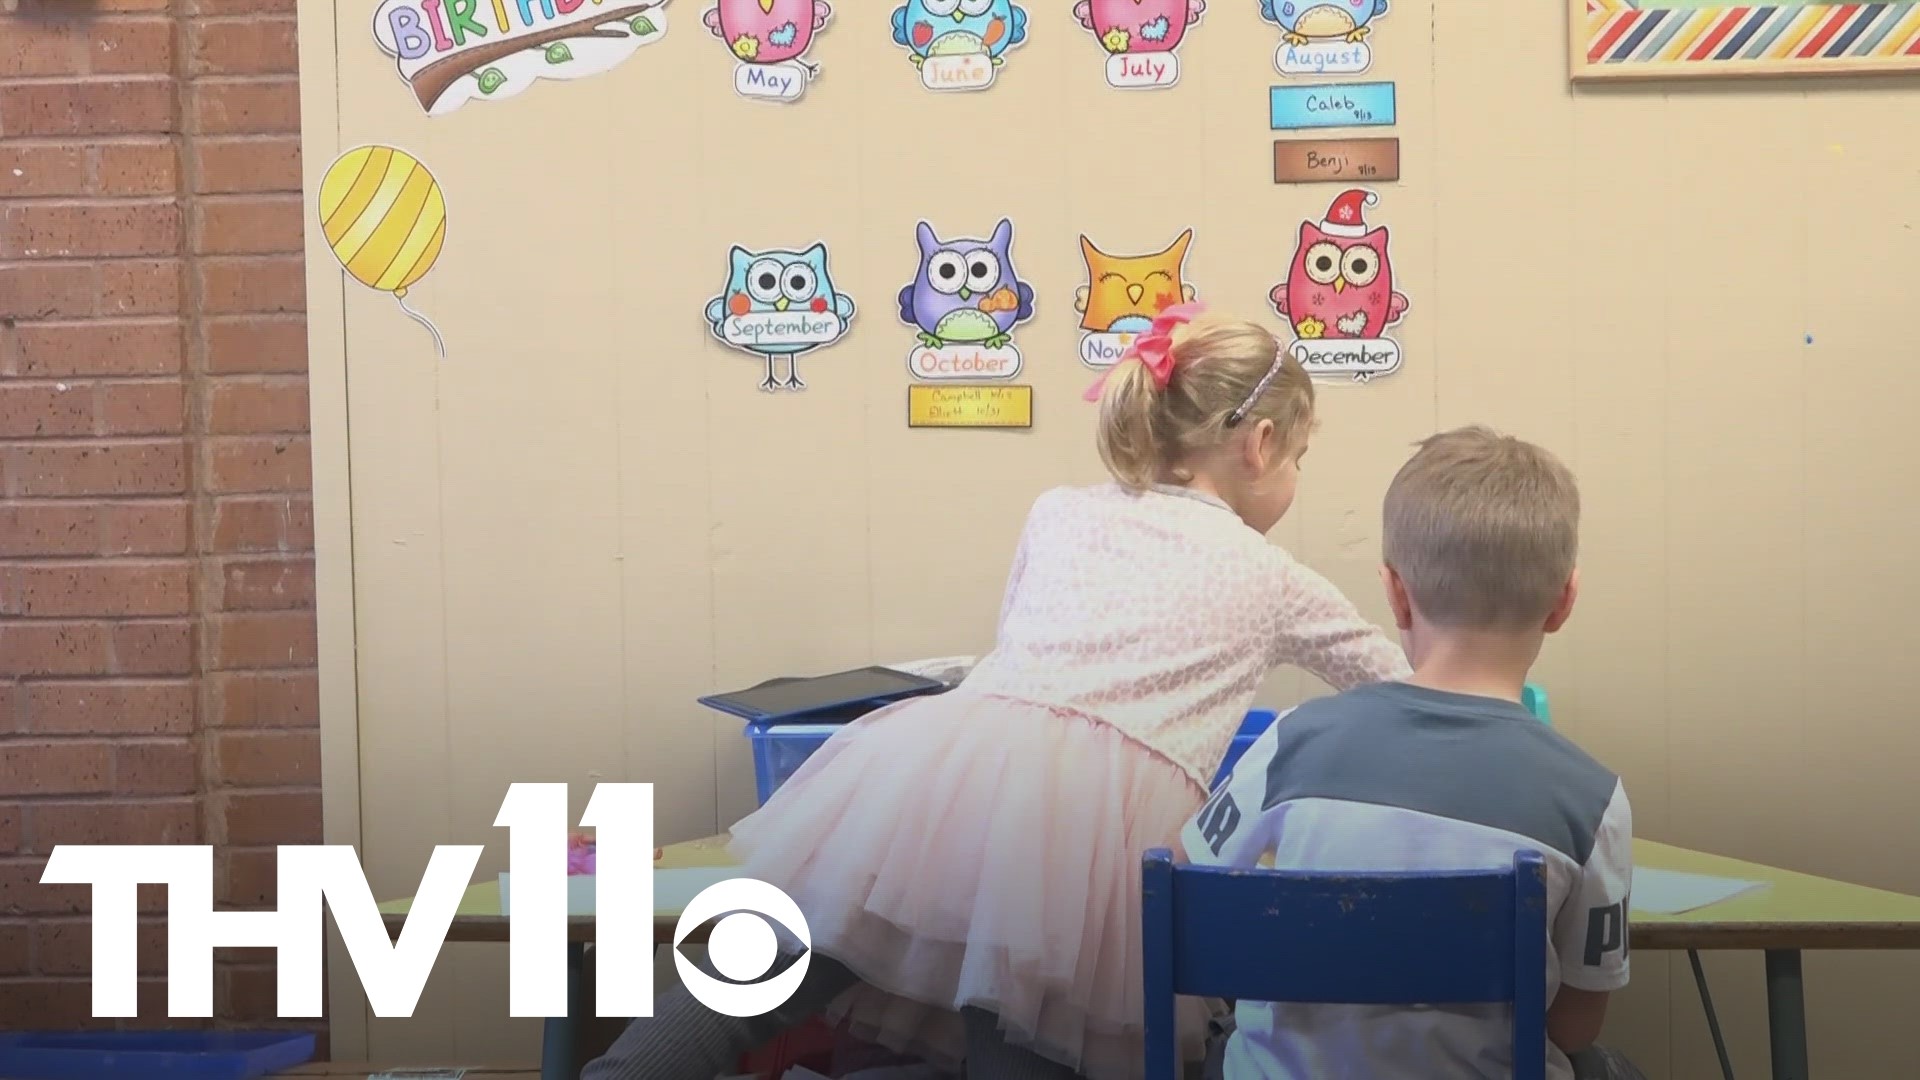 An Arkansas nonprofit group known as Joyfully Engaged Learning has been working to improve the lack of accredited pre-K programs in the Natural State.